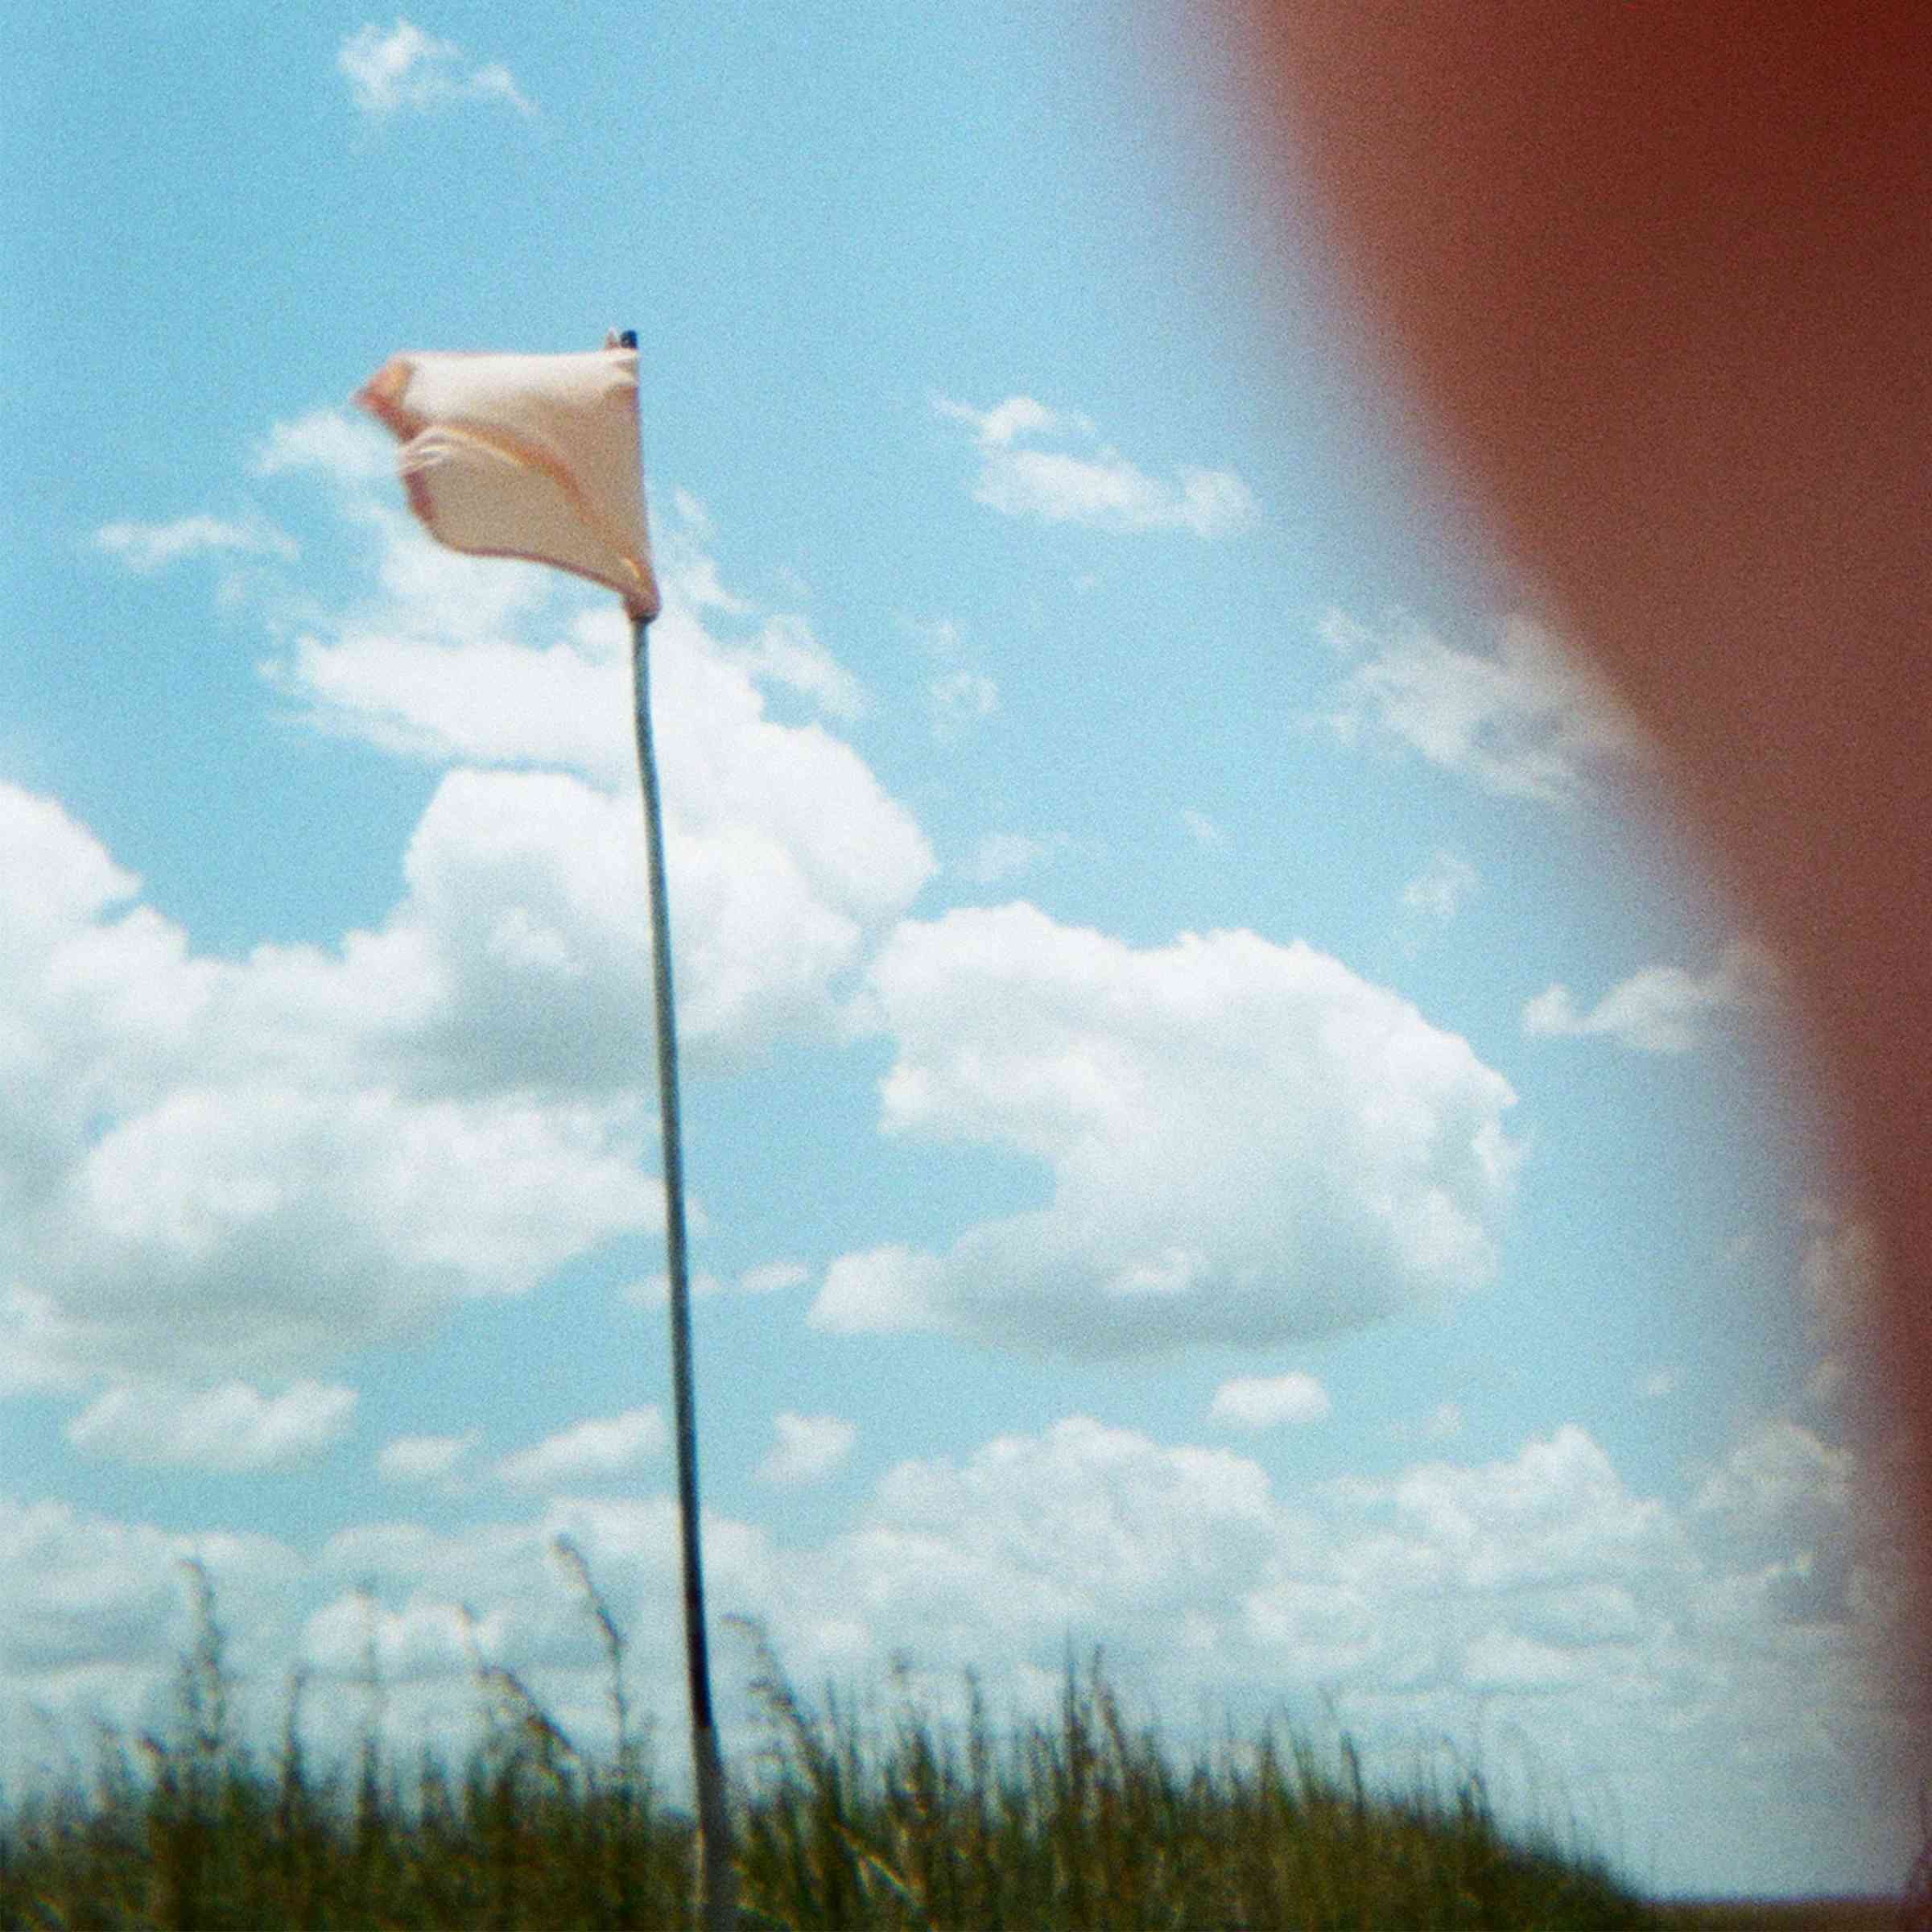 Disposable Camera Image of a Flag